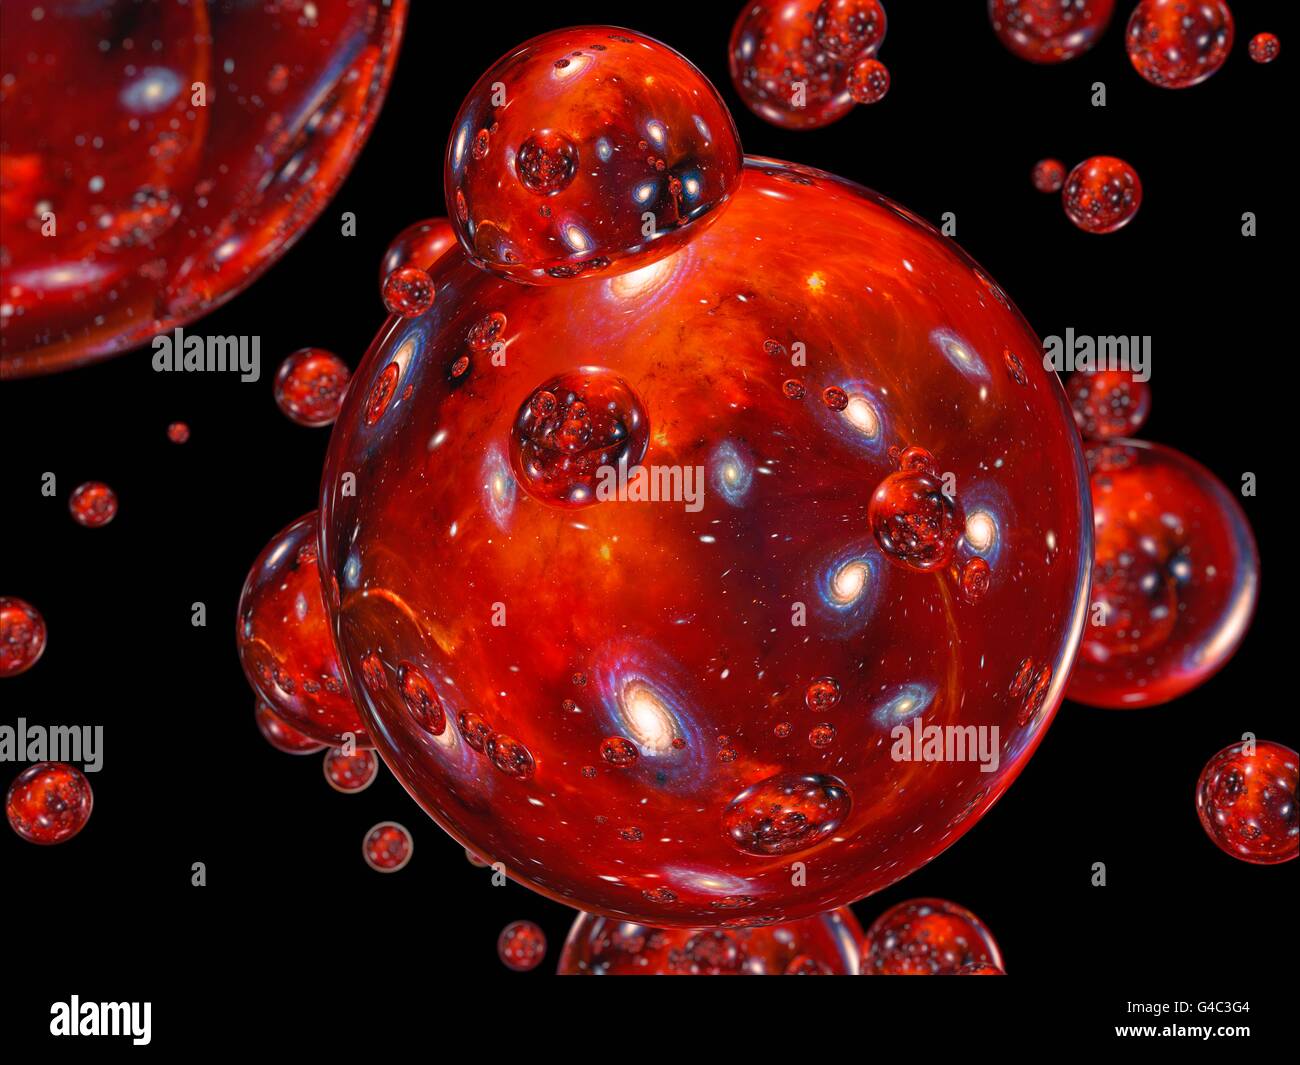 Bubble universes. Computer illustration of multiple 'bubble' universes as predicted by the Eternal Inflation theory. The inflationary theory proposes that after the Big Bang, a condition known as a false vacuum created a repulsive force that caused an incredibly rapid expansion, much faster than the ordinary expansion observed today. Since this expansion is faster than the speed of light, areas of inflation would form bubbles that would be completely isolated from each other. This artwork could also represent the creation of separate 'parallel' universes as fluctuations in a quantum foam. Stock Photo